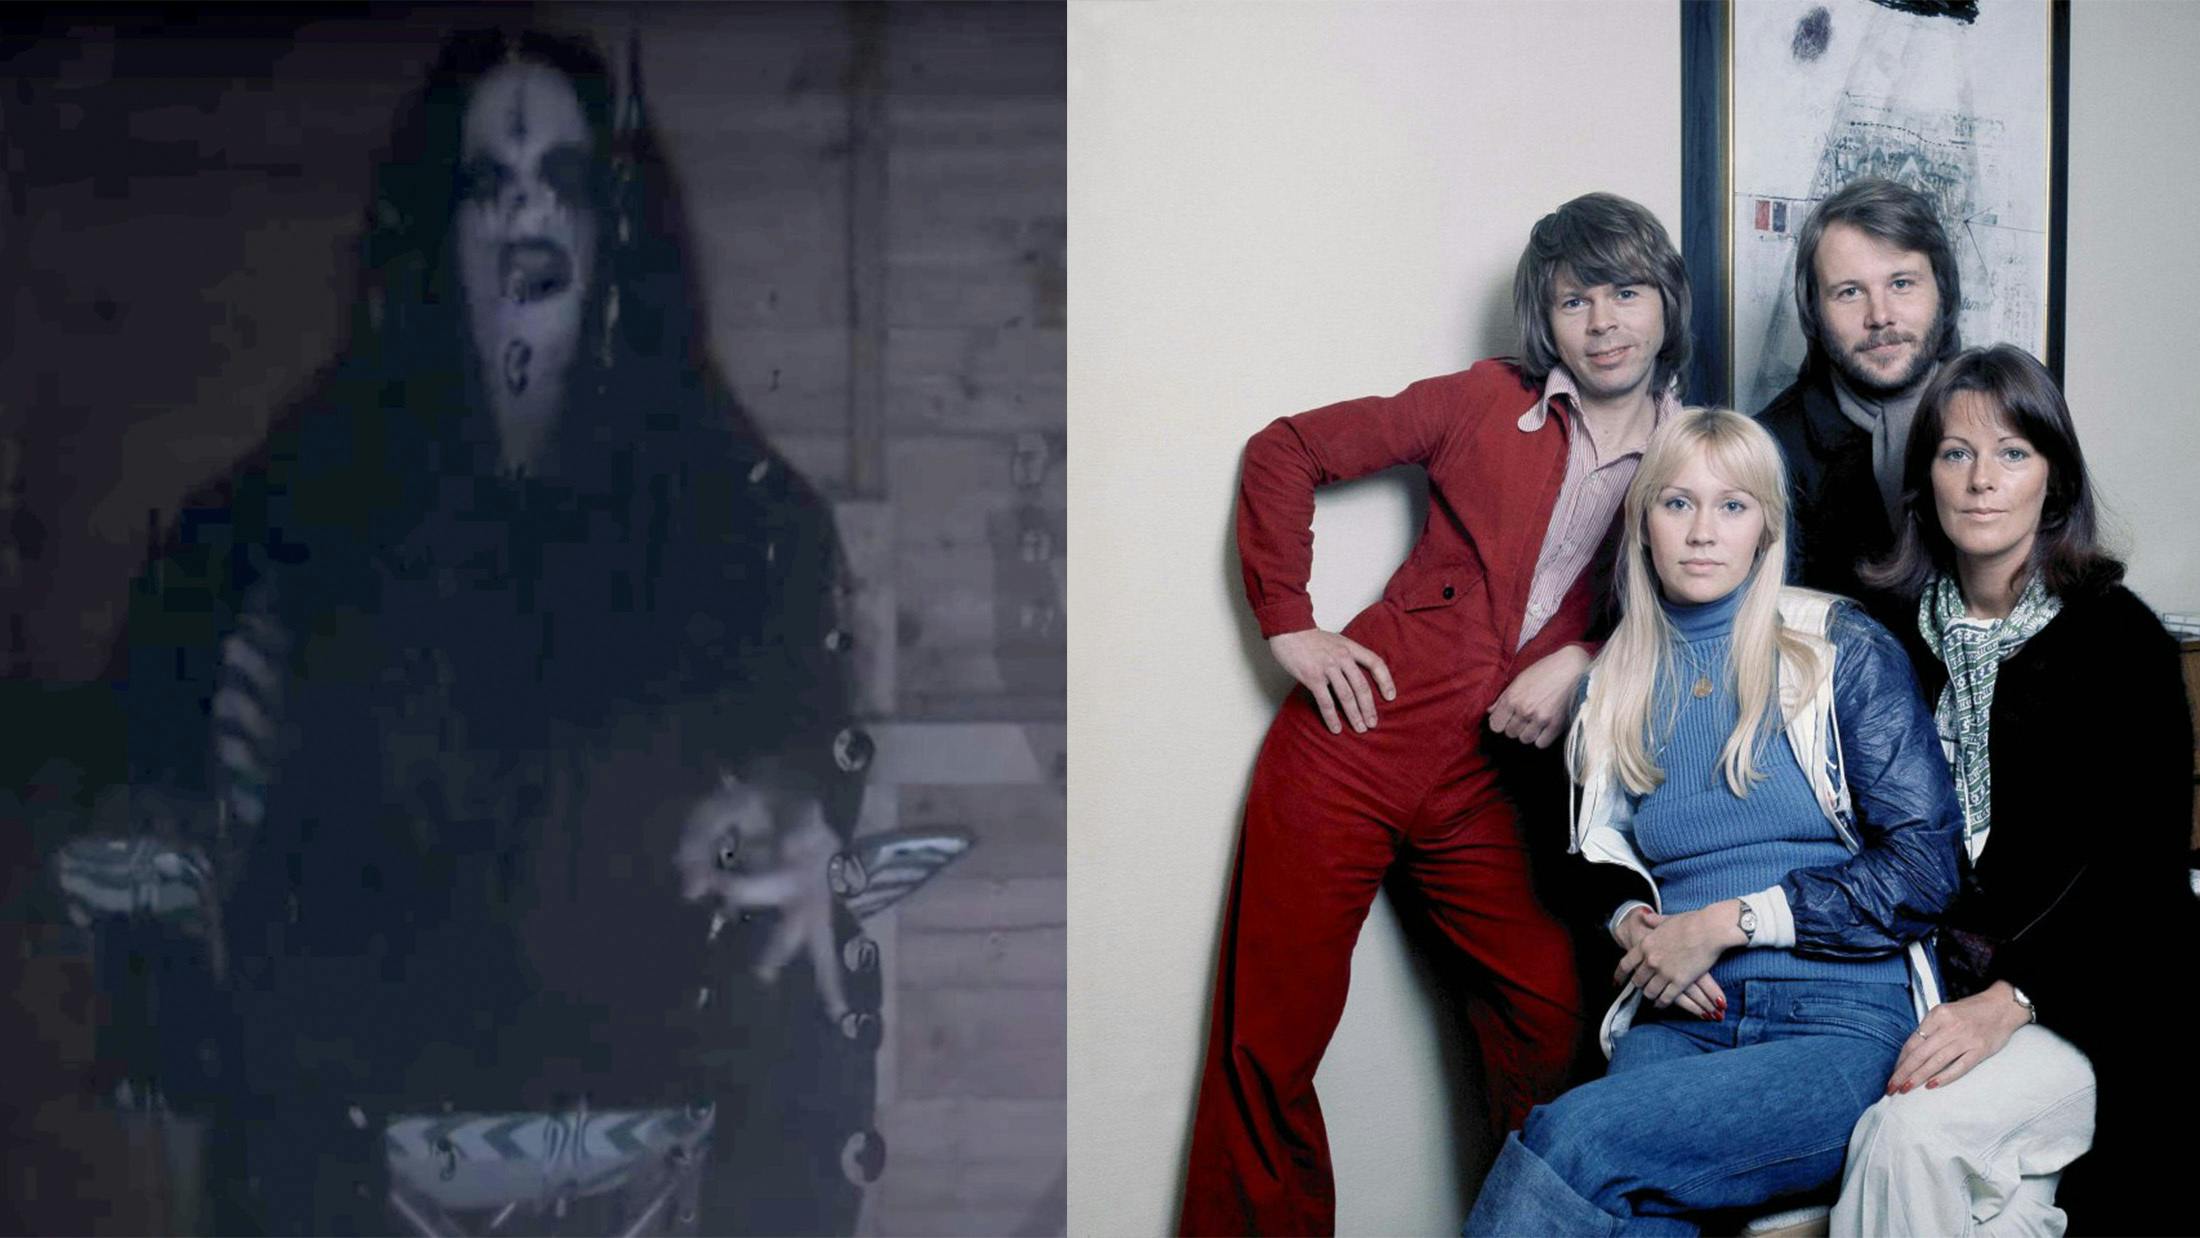 Abba Songs In A Black Metal Style